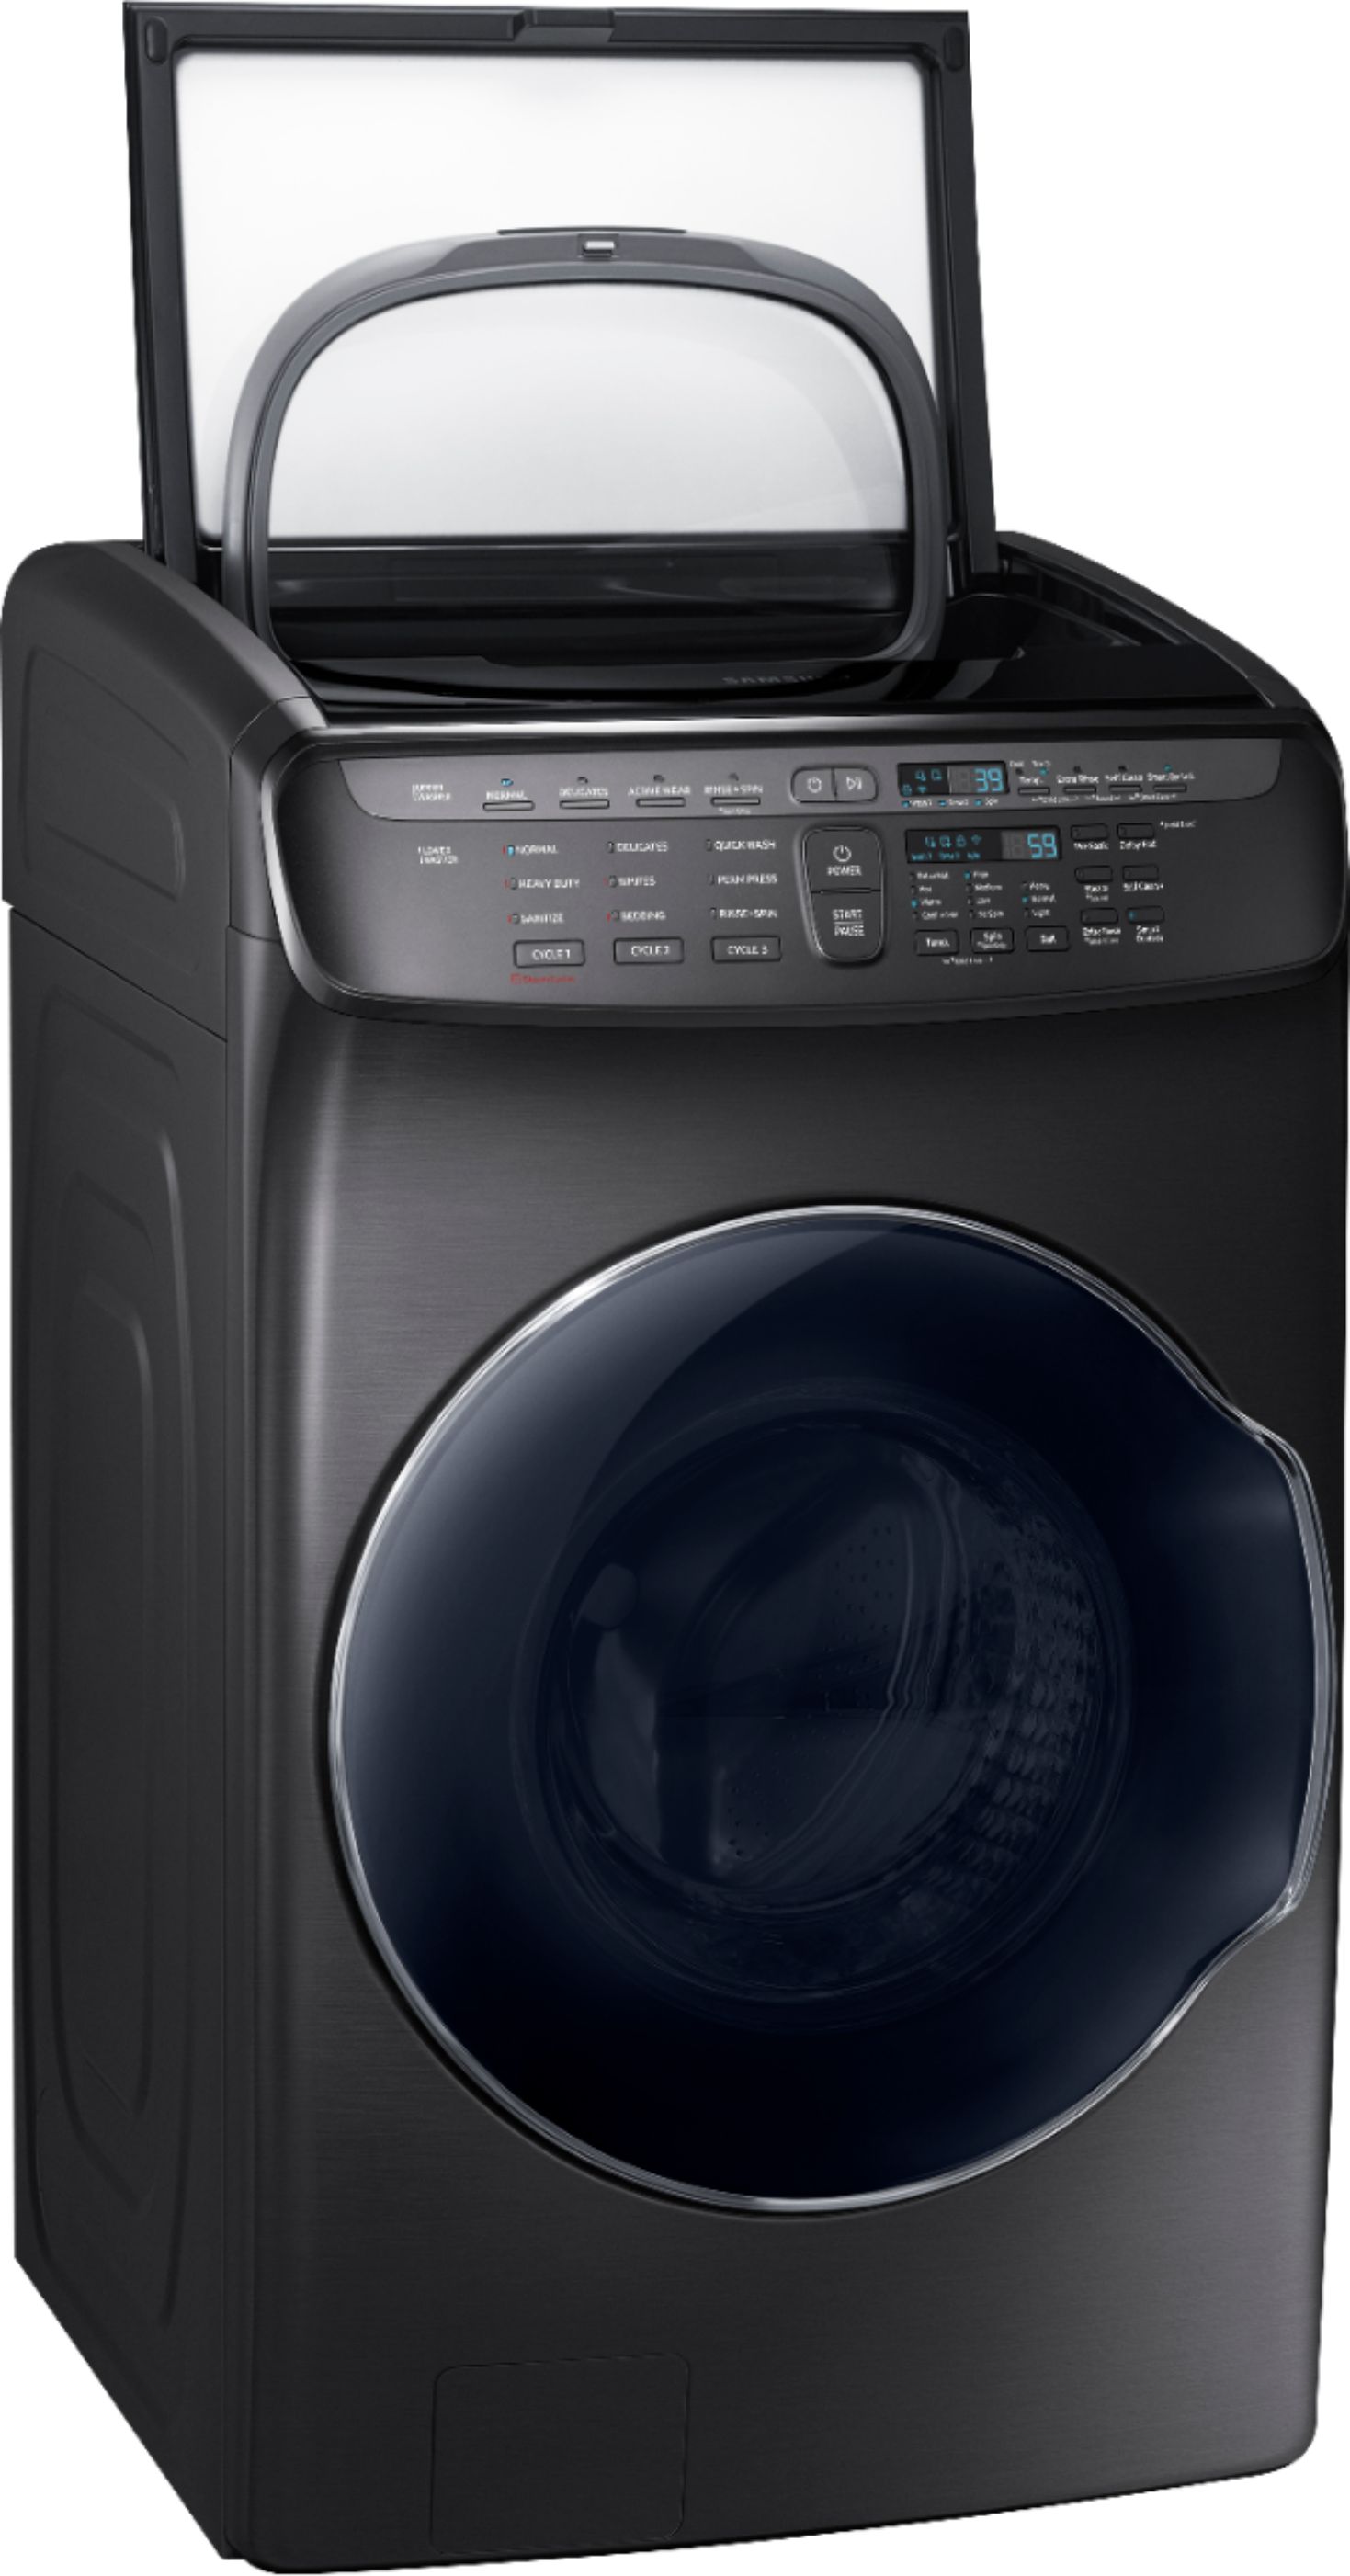 Angle View: Samsung - 5.5 Cu. Ft. High Efficiency Front Load Washer with Steam and FlexWash - Black stainless steel